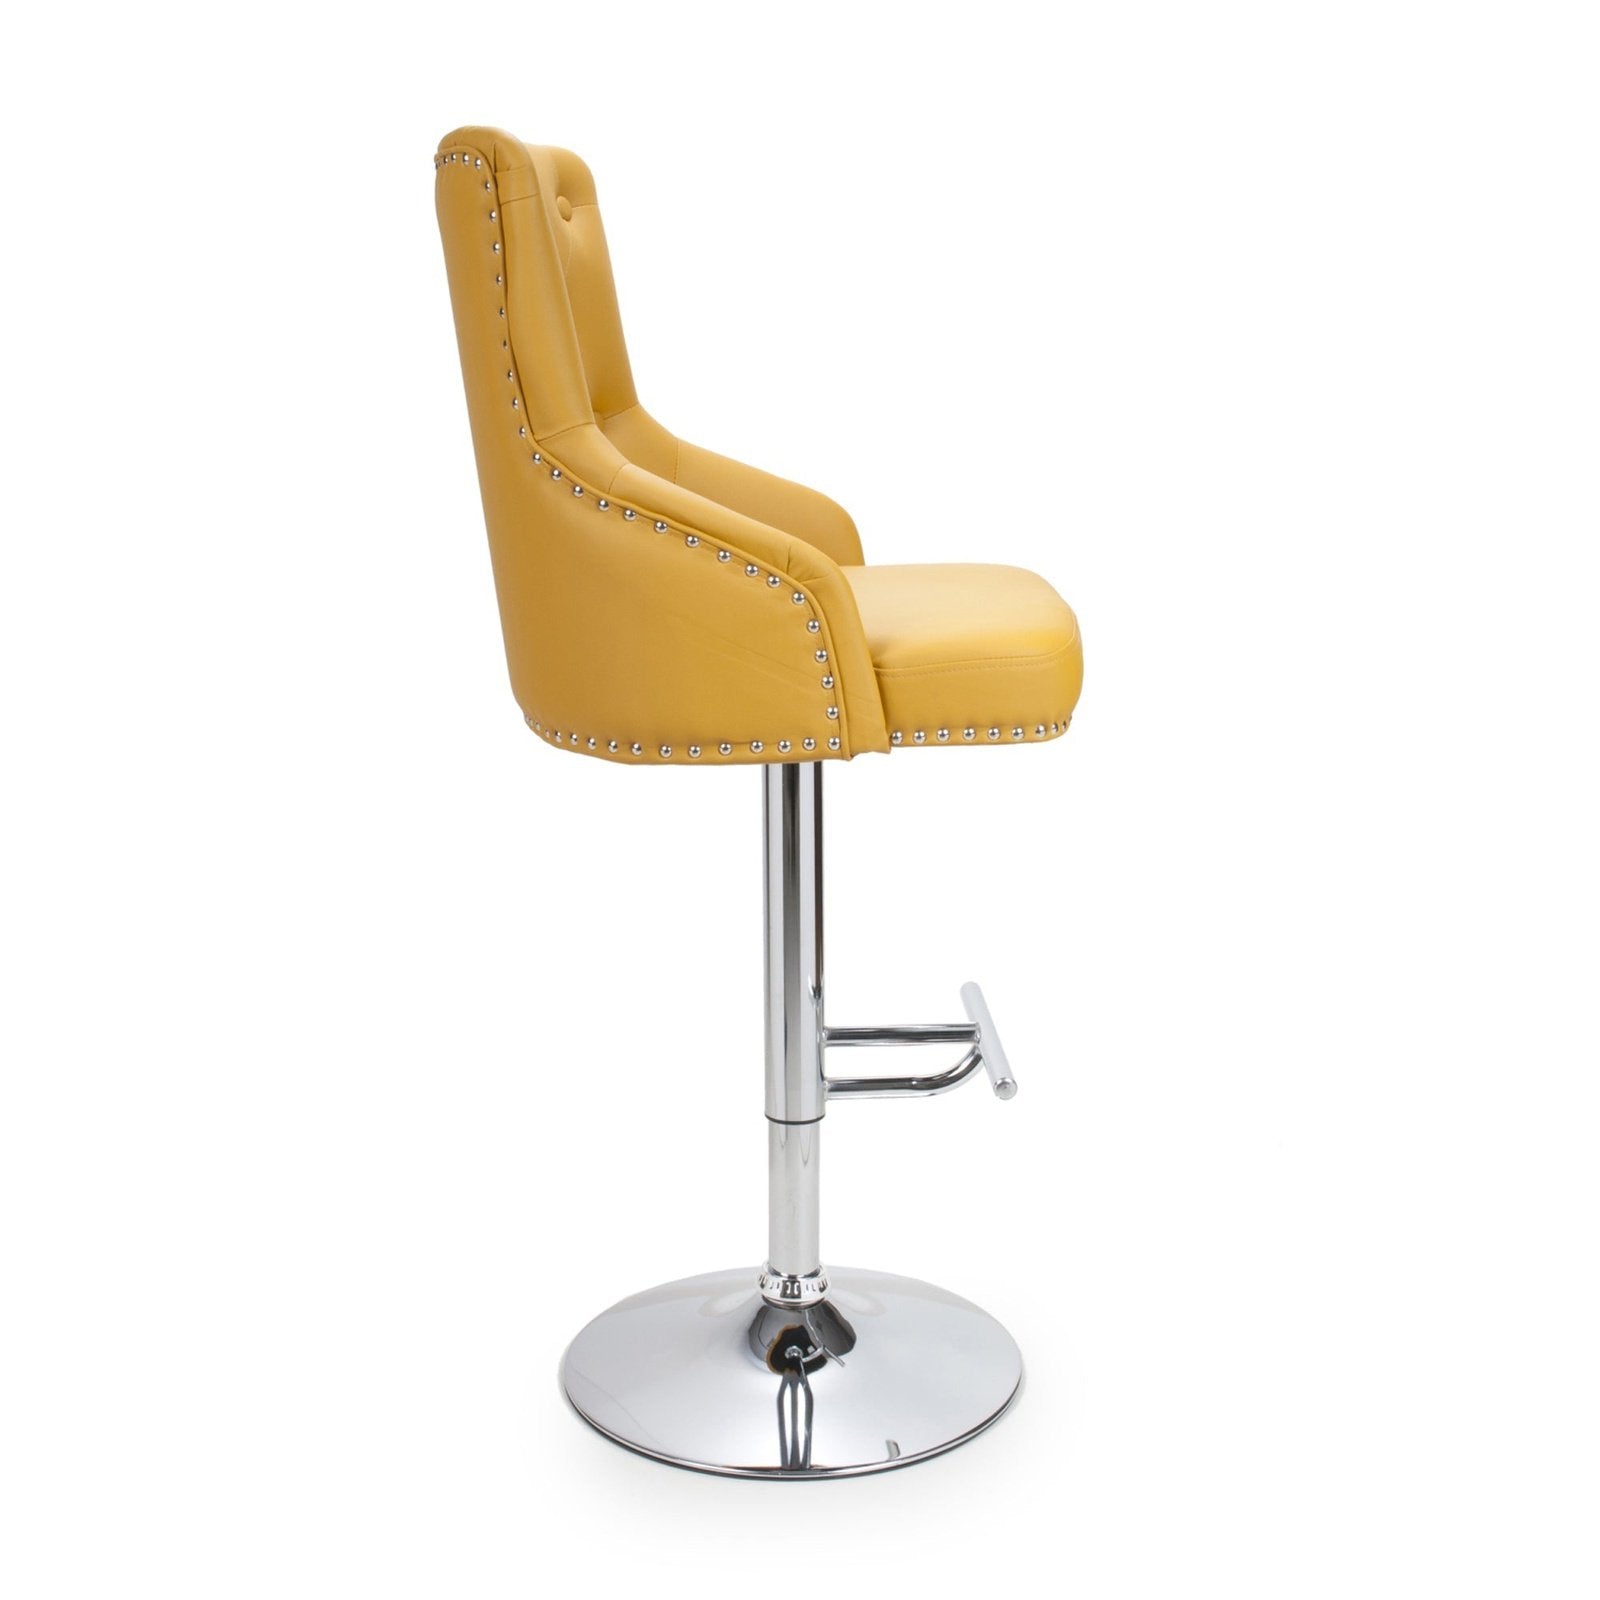 Rocco Yellow Leather Bar Stool